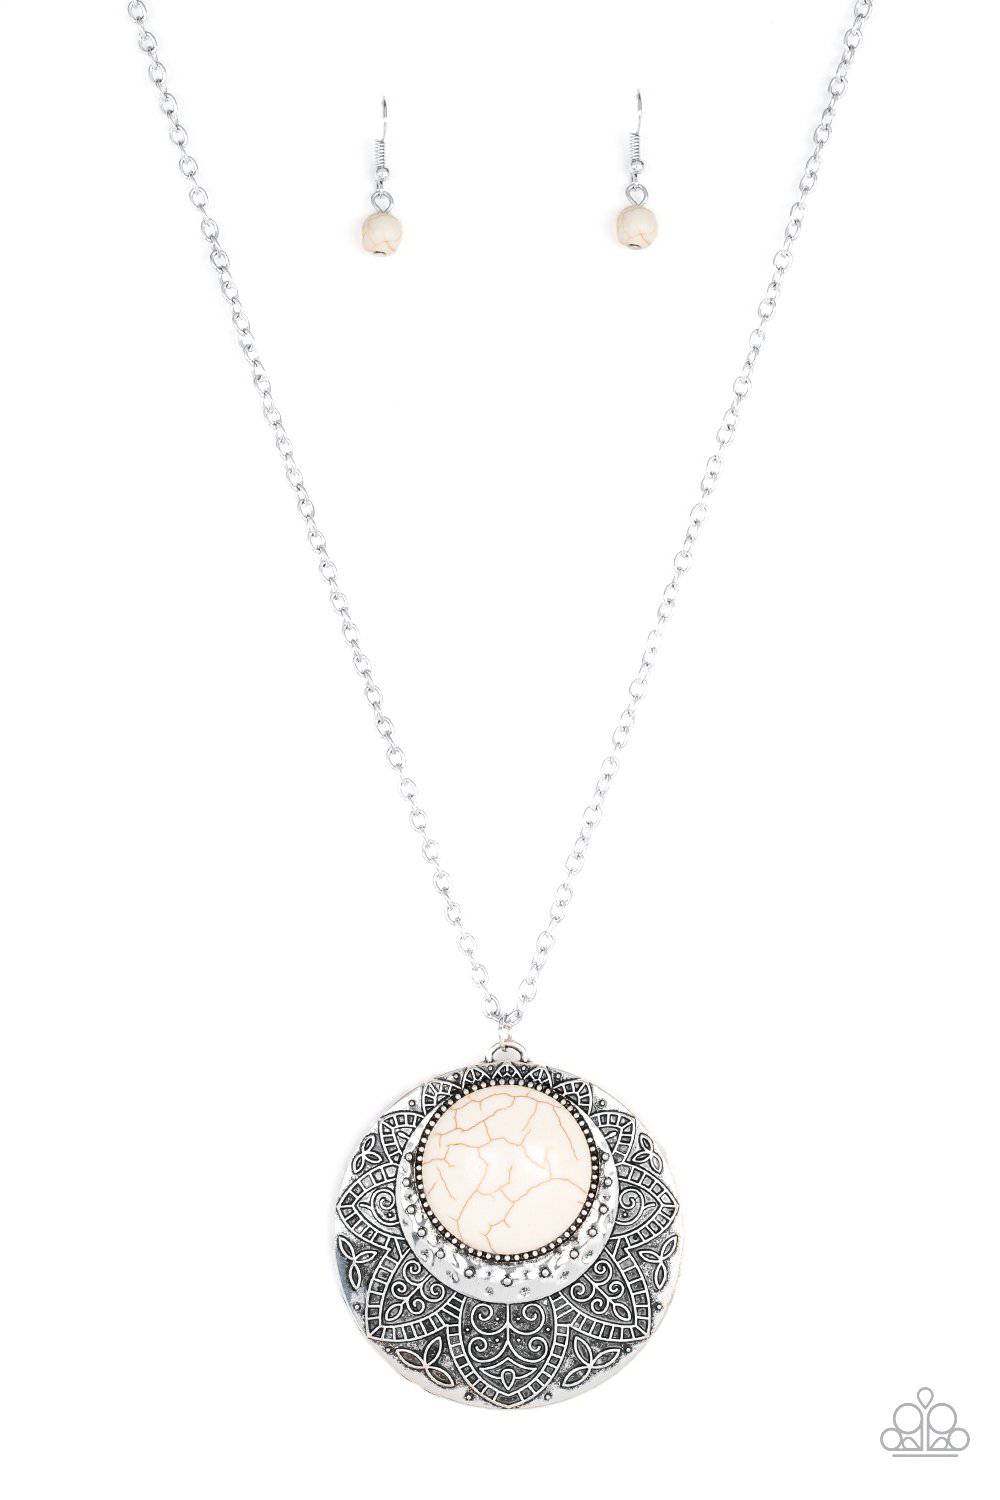 Medallion Meadow - White Stone Necklace -Paparazzi Accessories - GlaMarous Titi Jewels